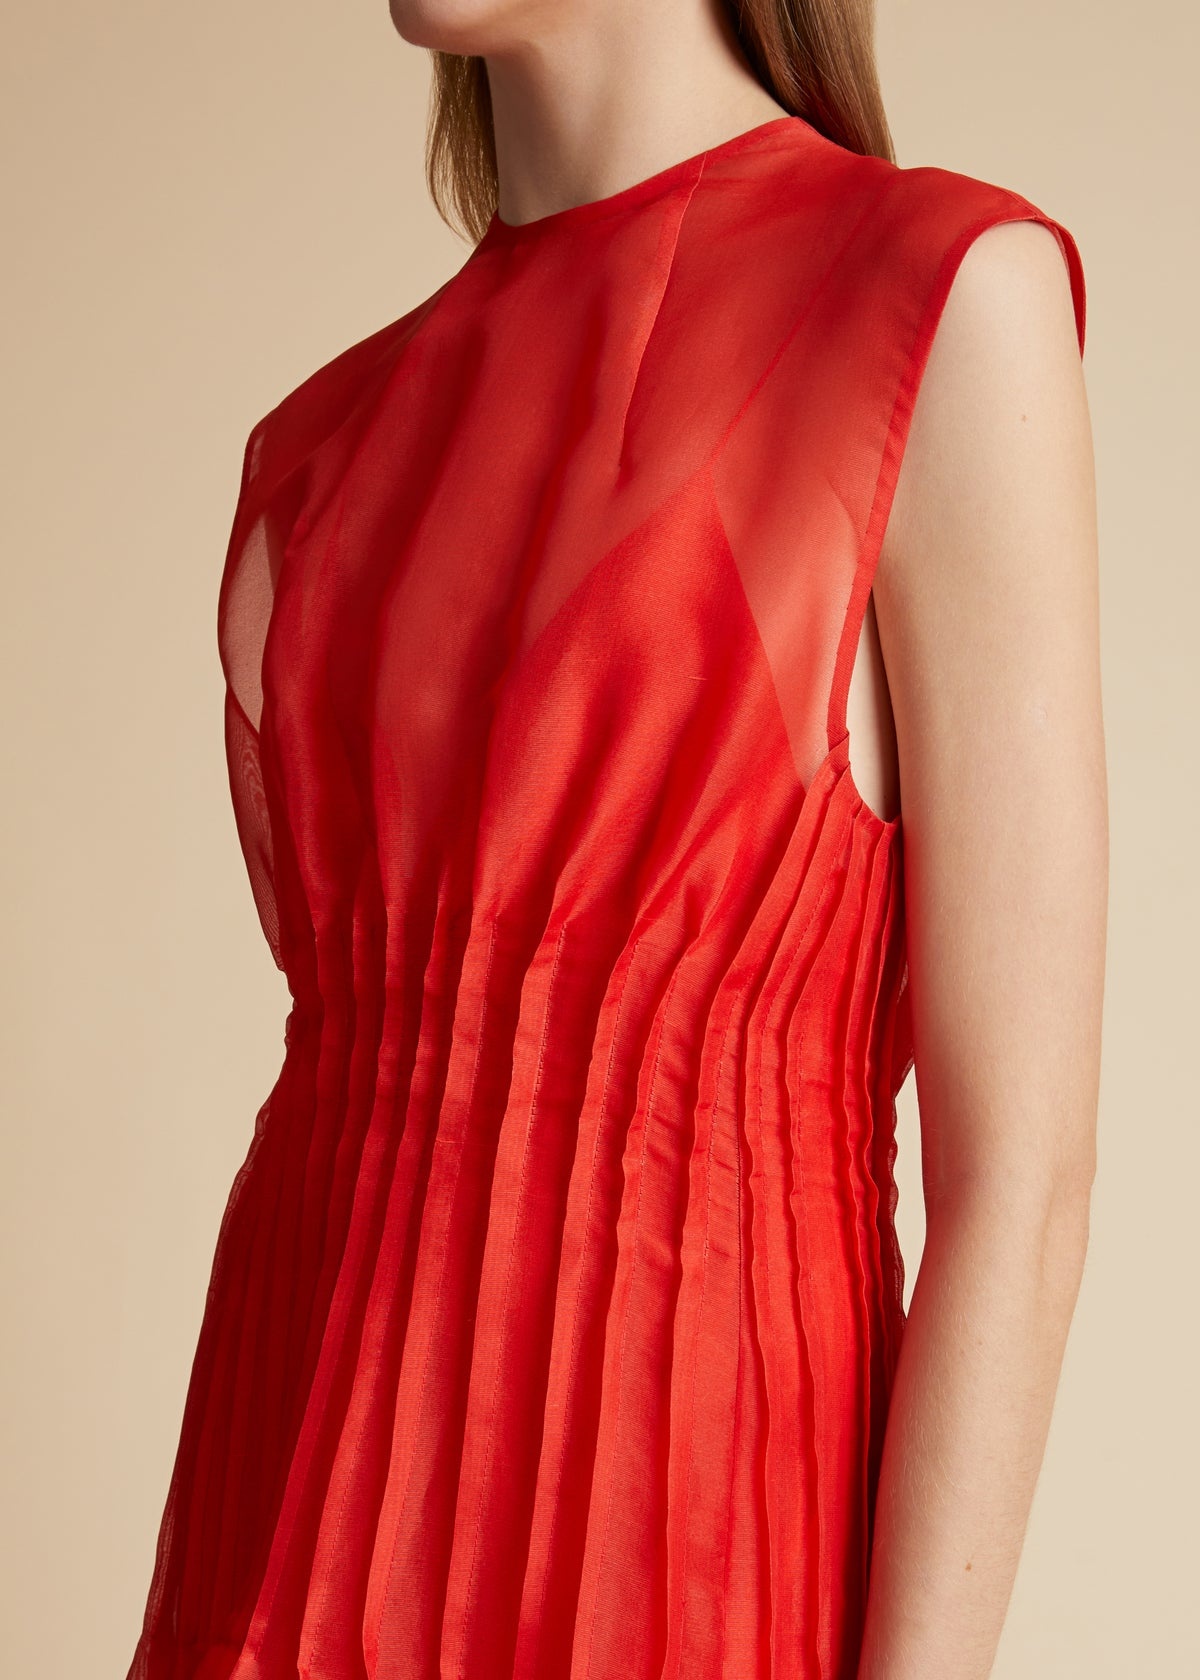 The Wes Dress in Fire Red - 4